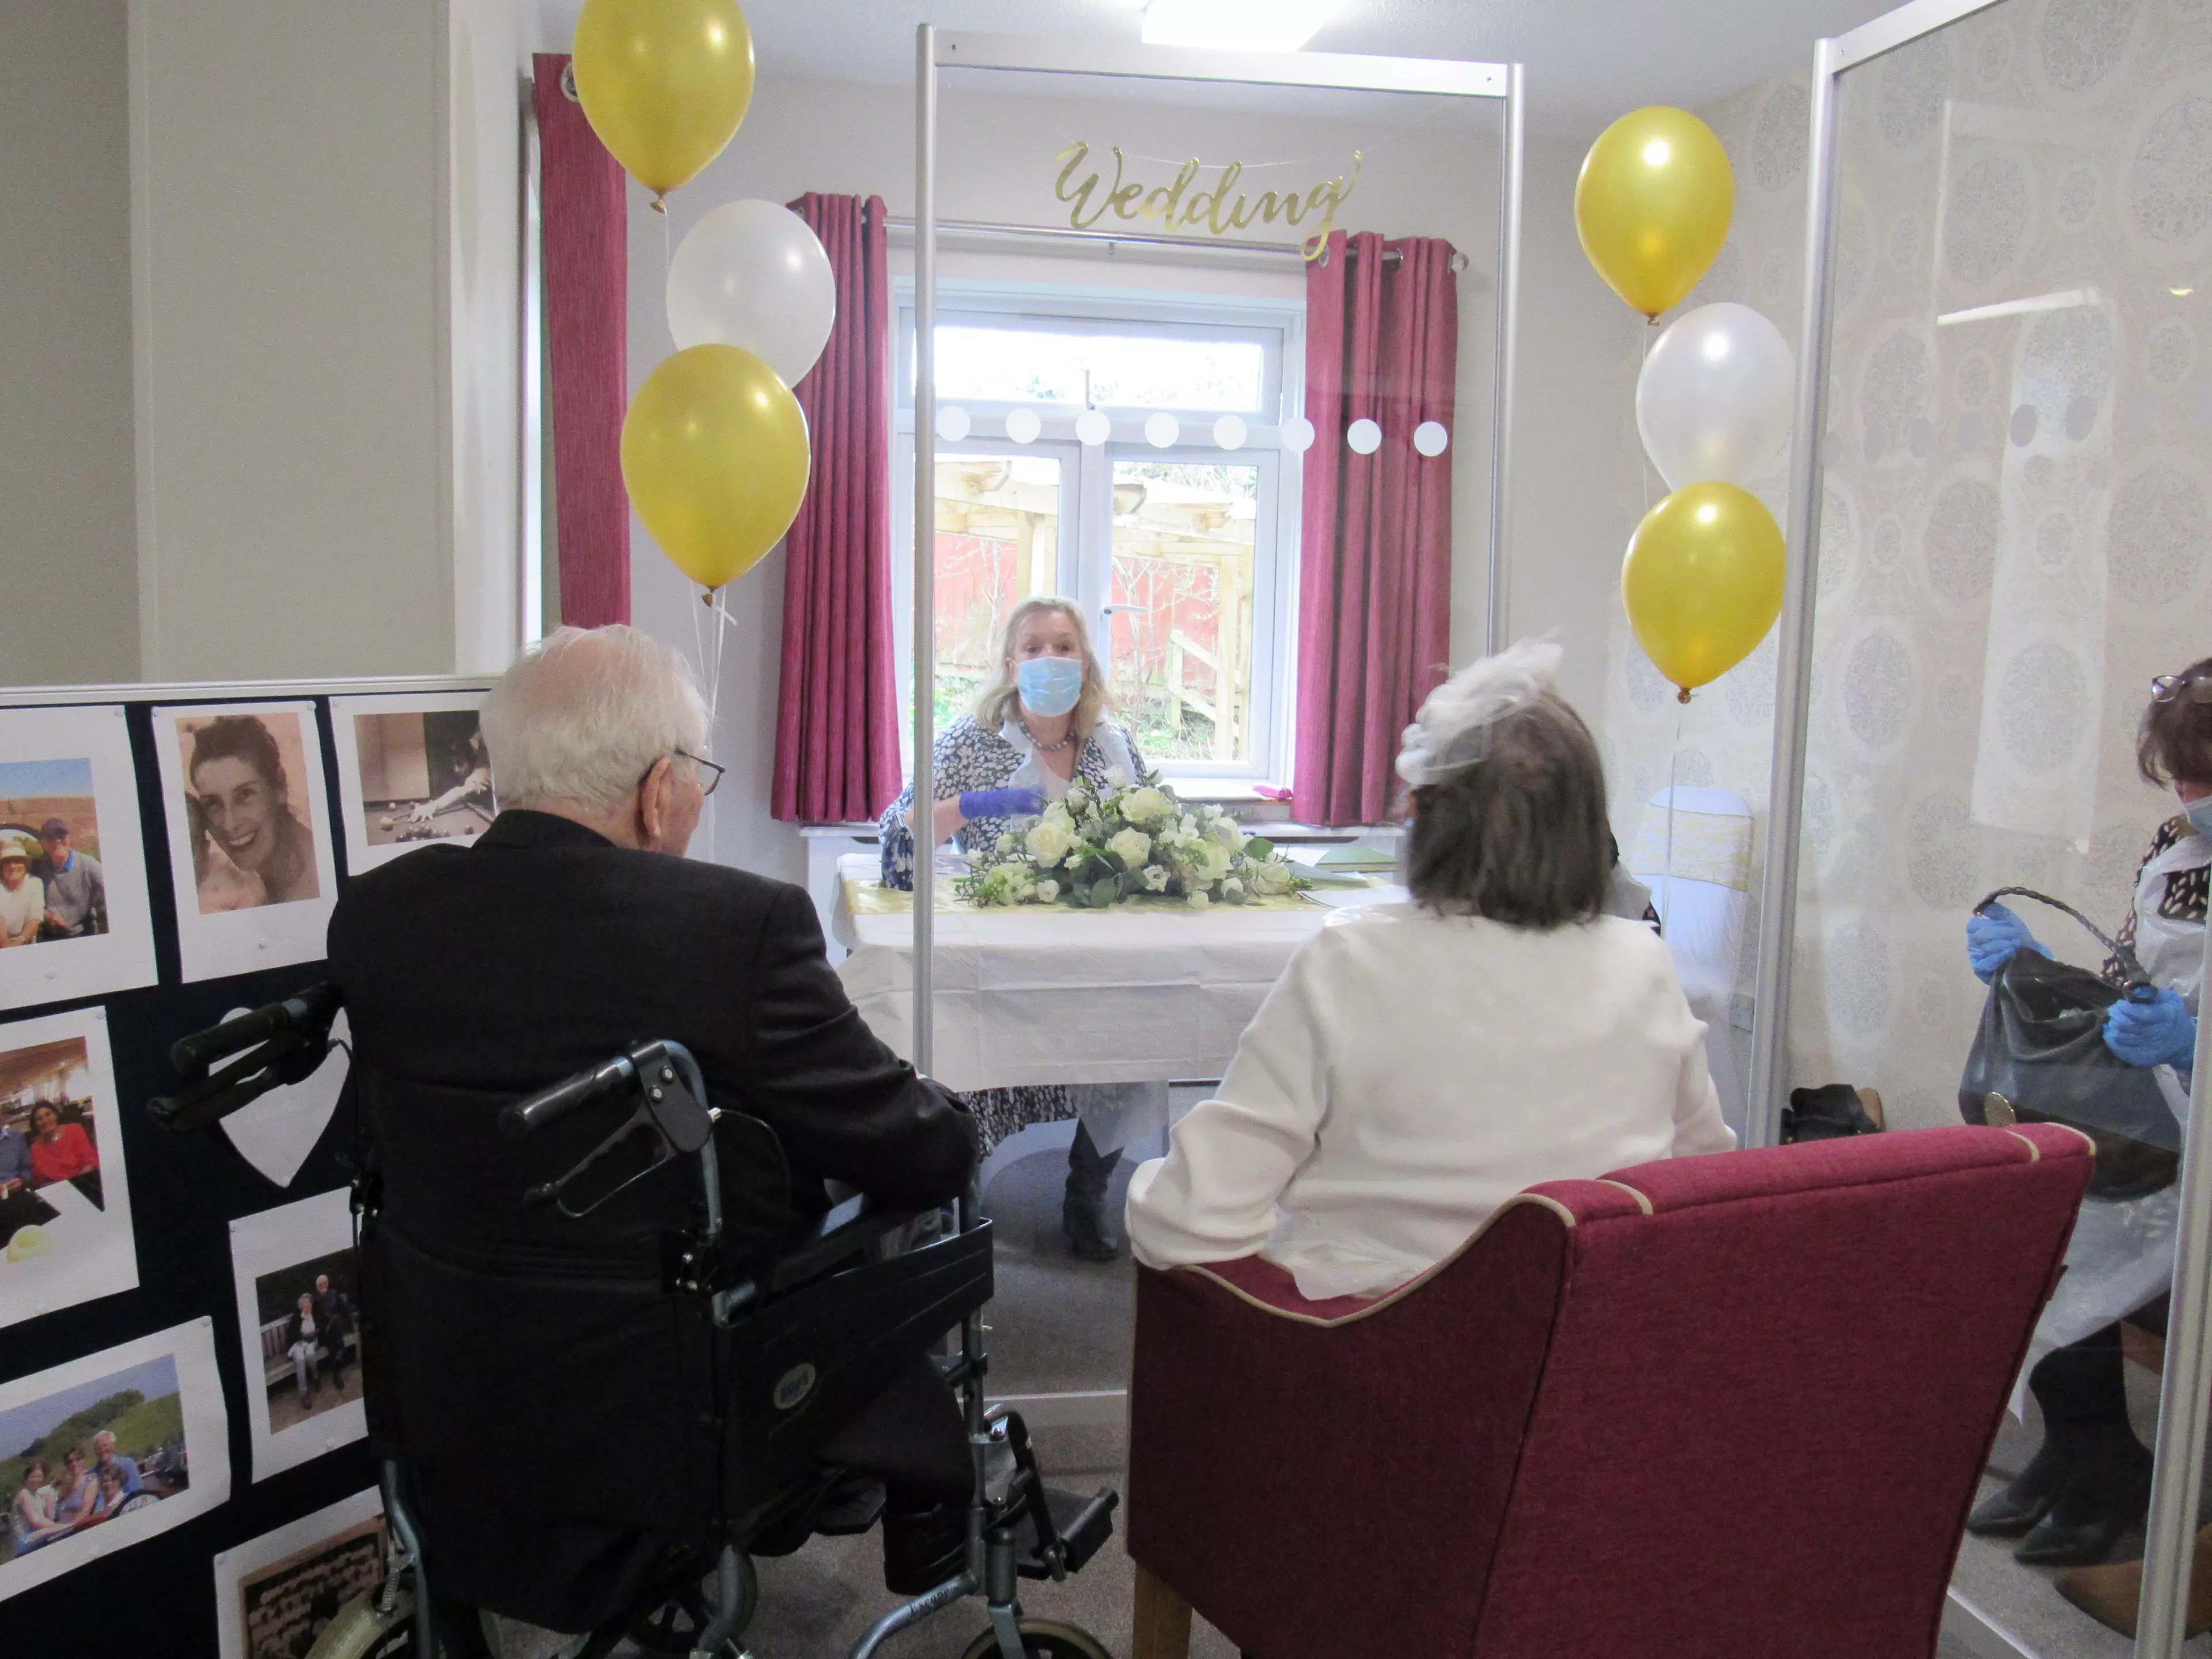 The pair got married in the care home following Peter's declining health (